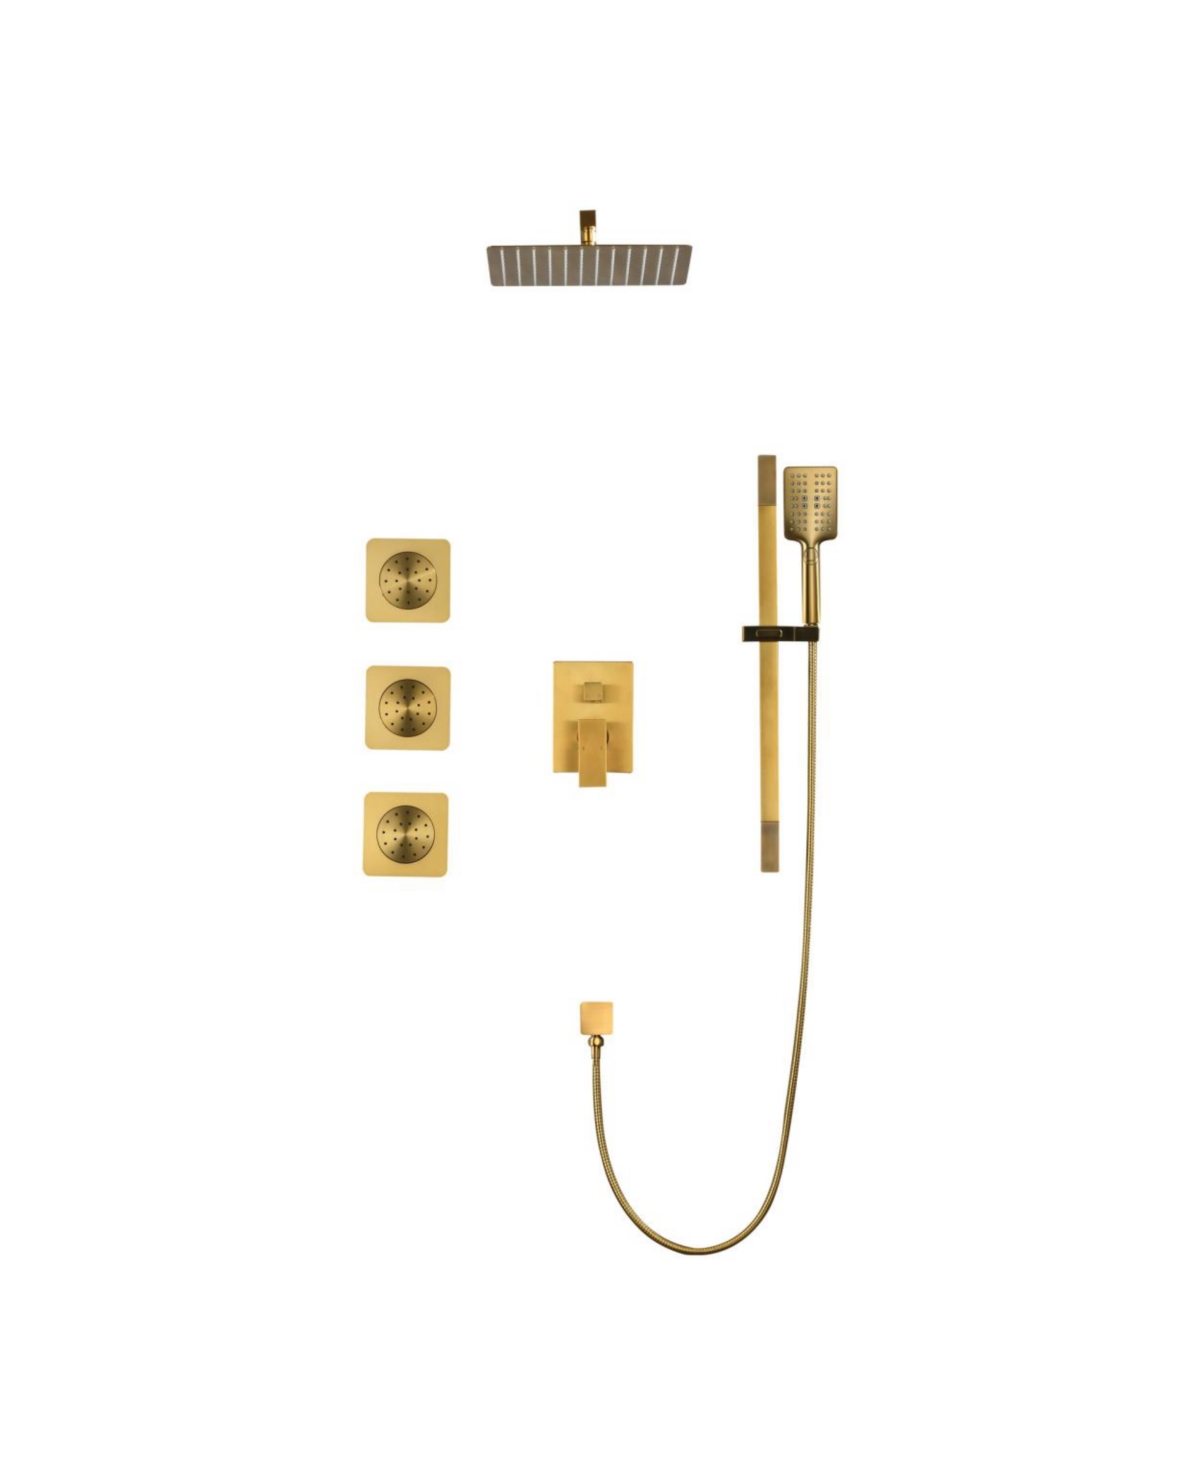 Complete Shower System with Multiple Components - Gold